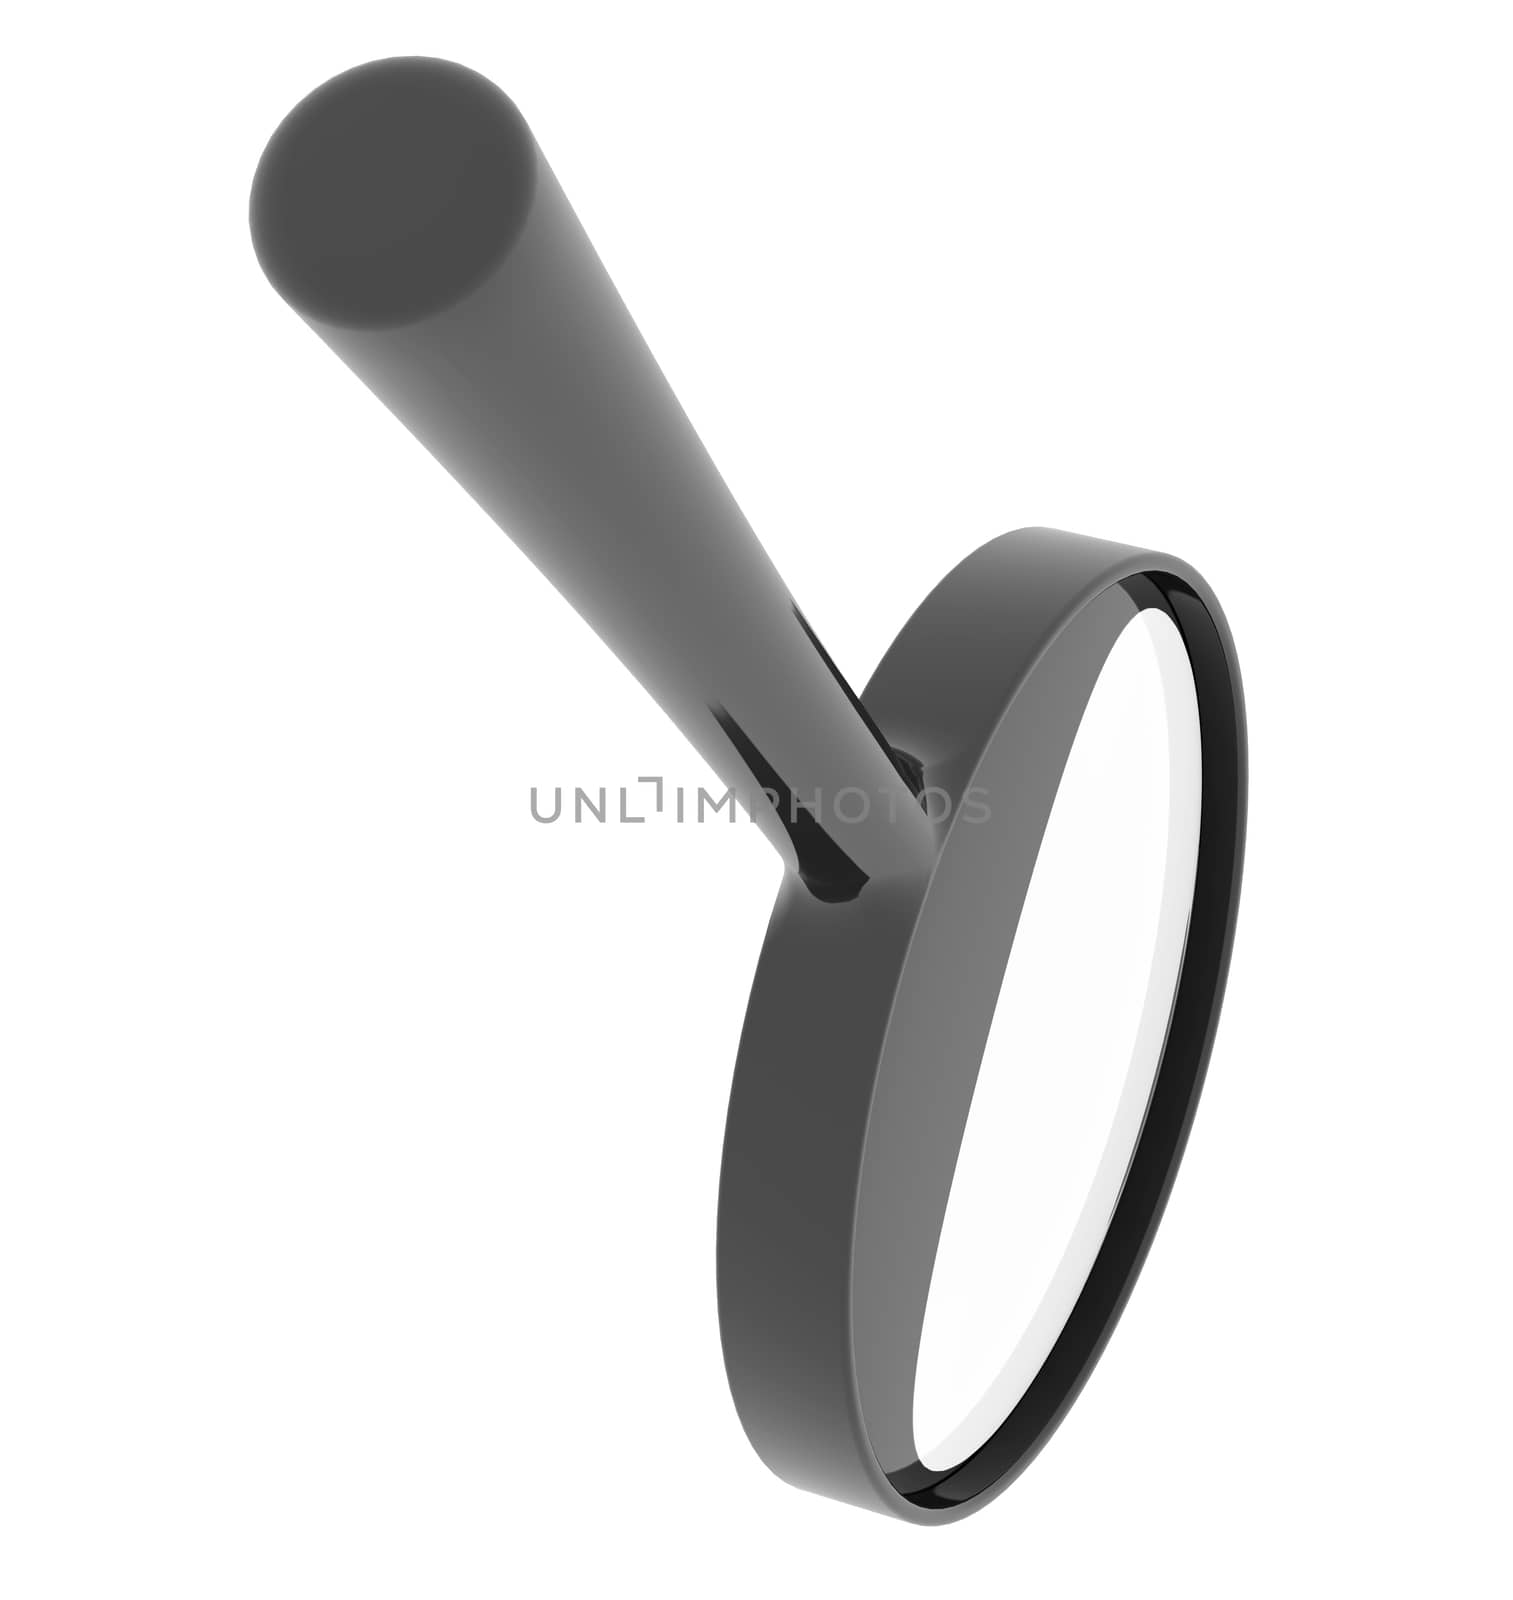 Black magnifier glass. Isolated on white background